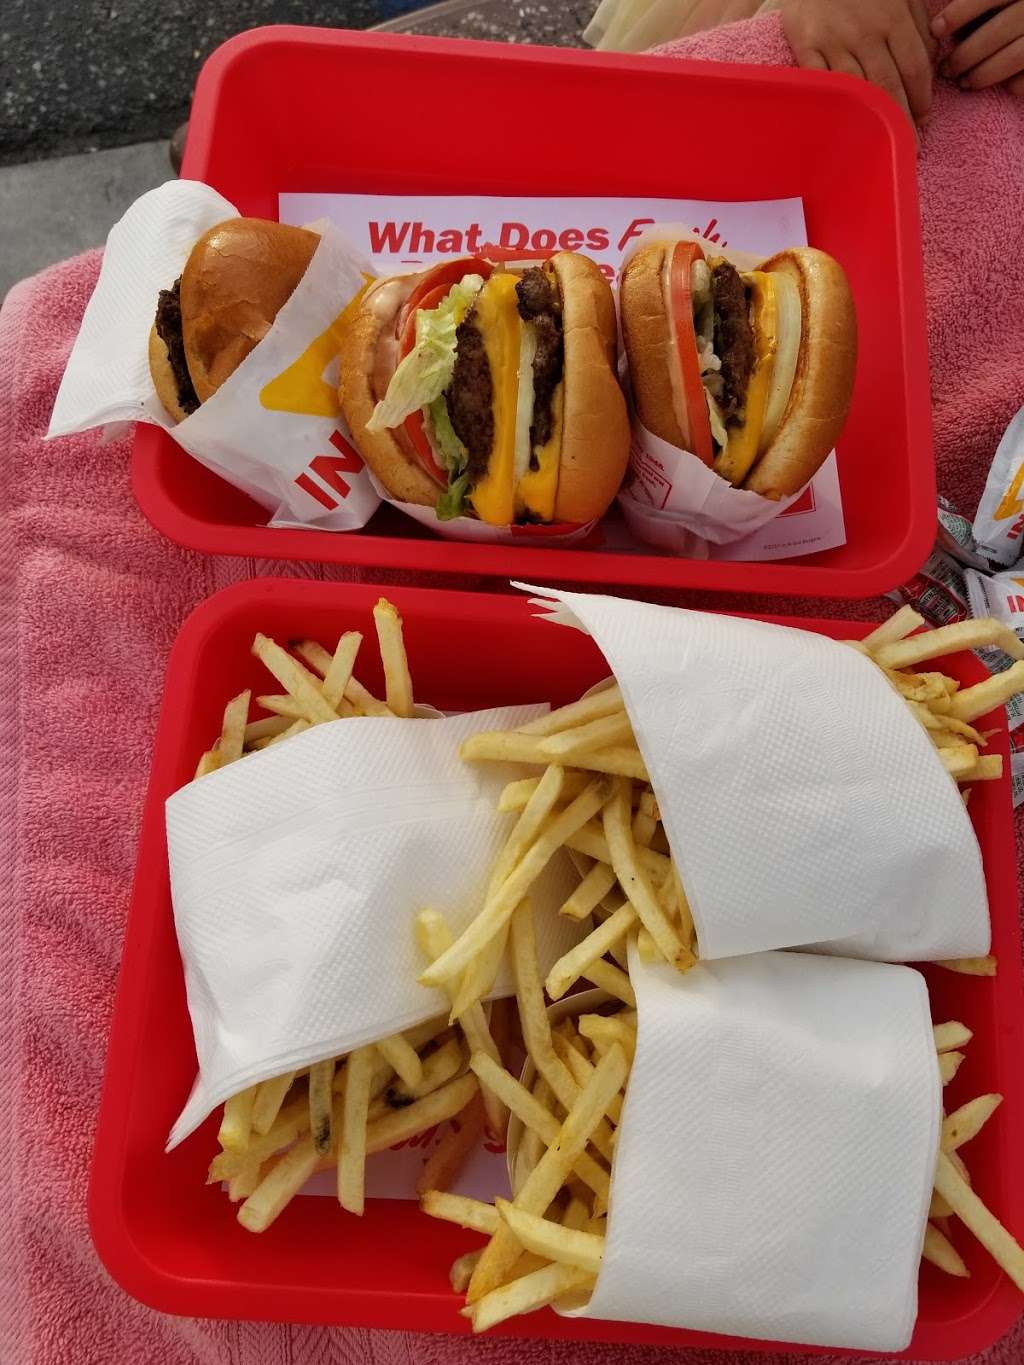 In-N-Out Burger | 324 S Azusa Ave, Azusa, CA 91702 | Phone: (800) 786-1000